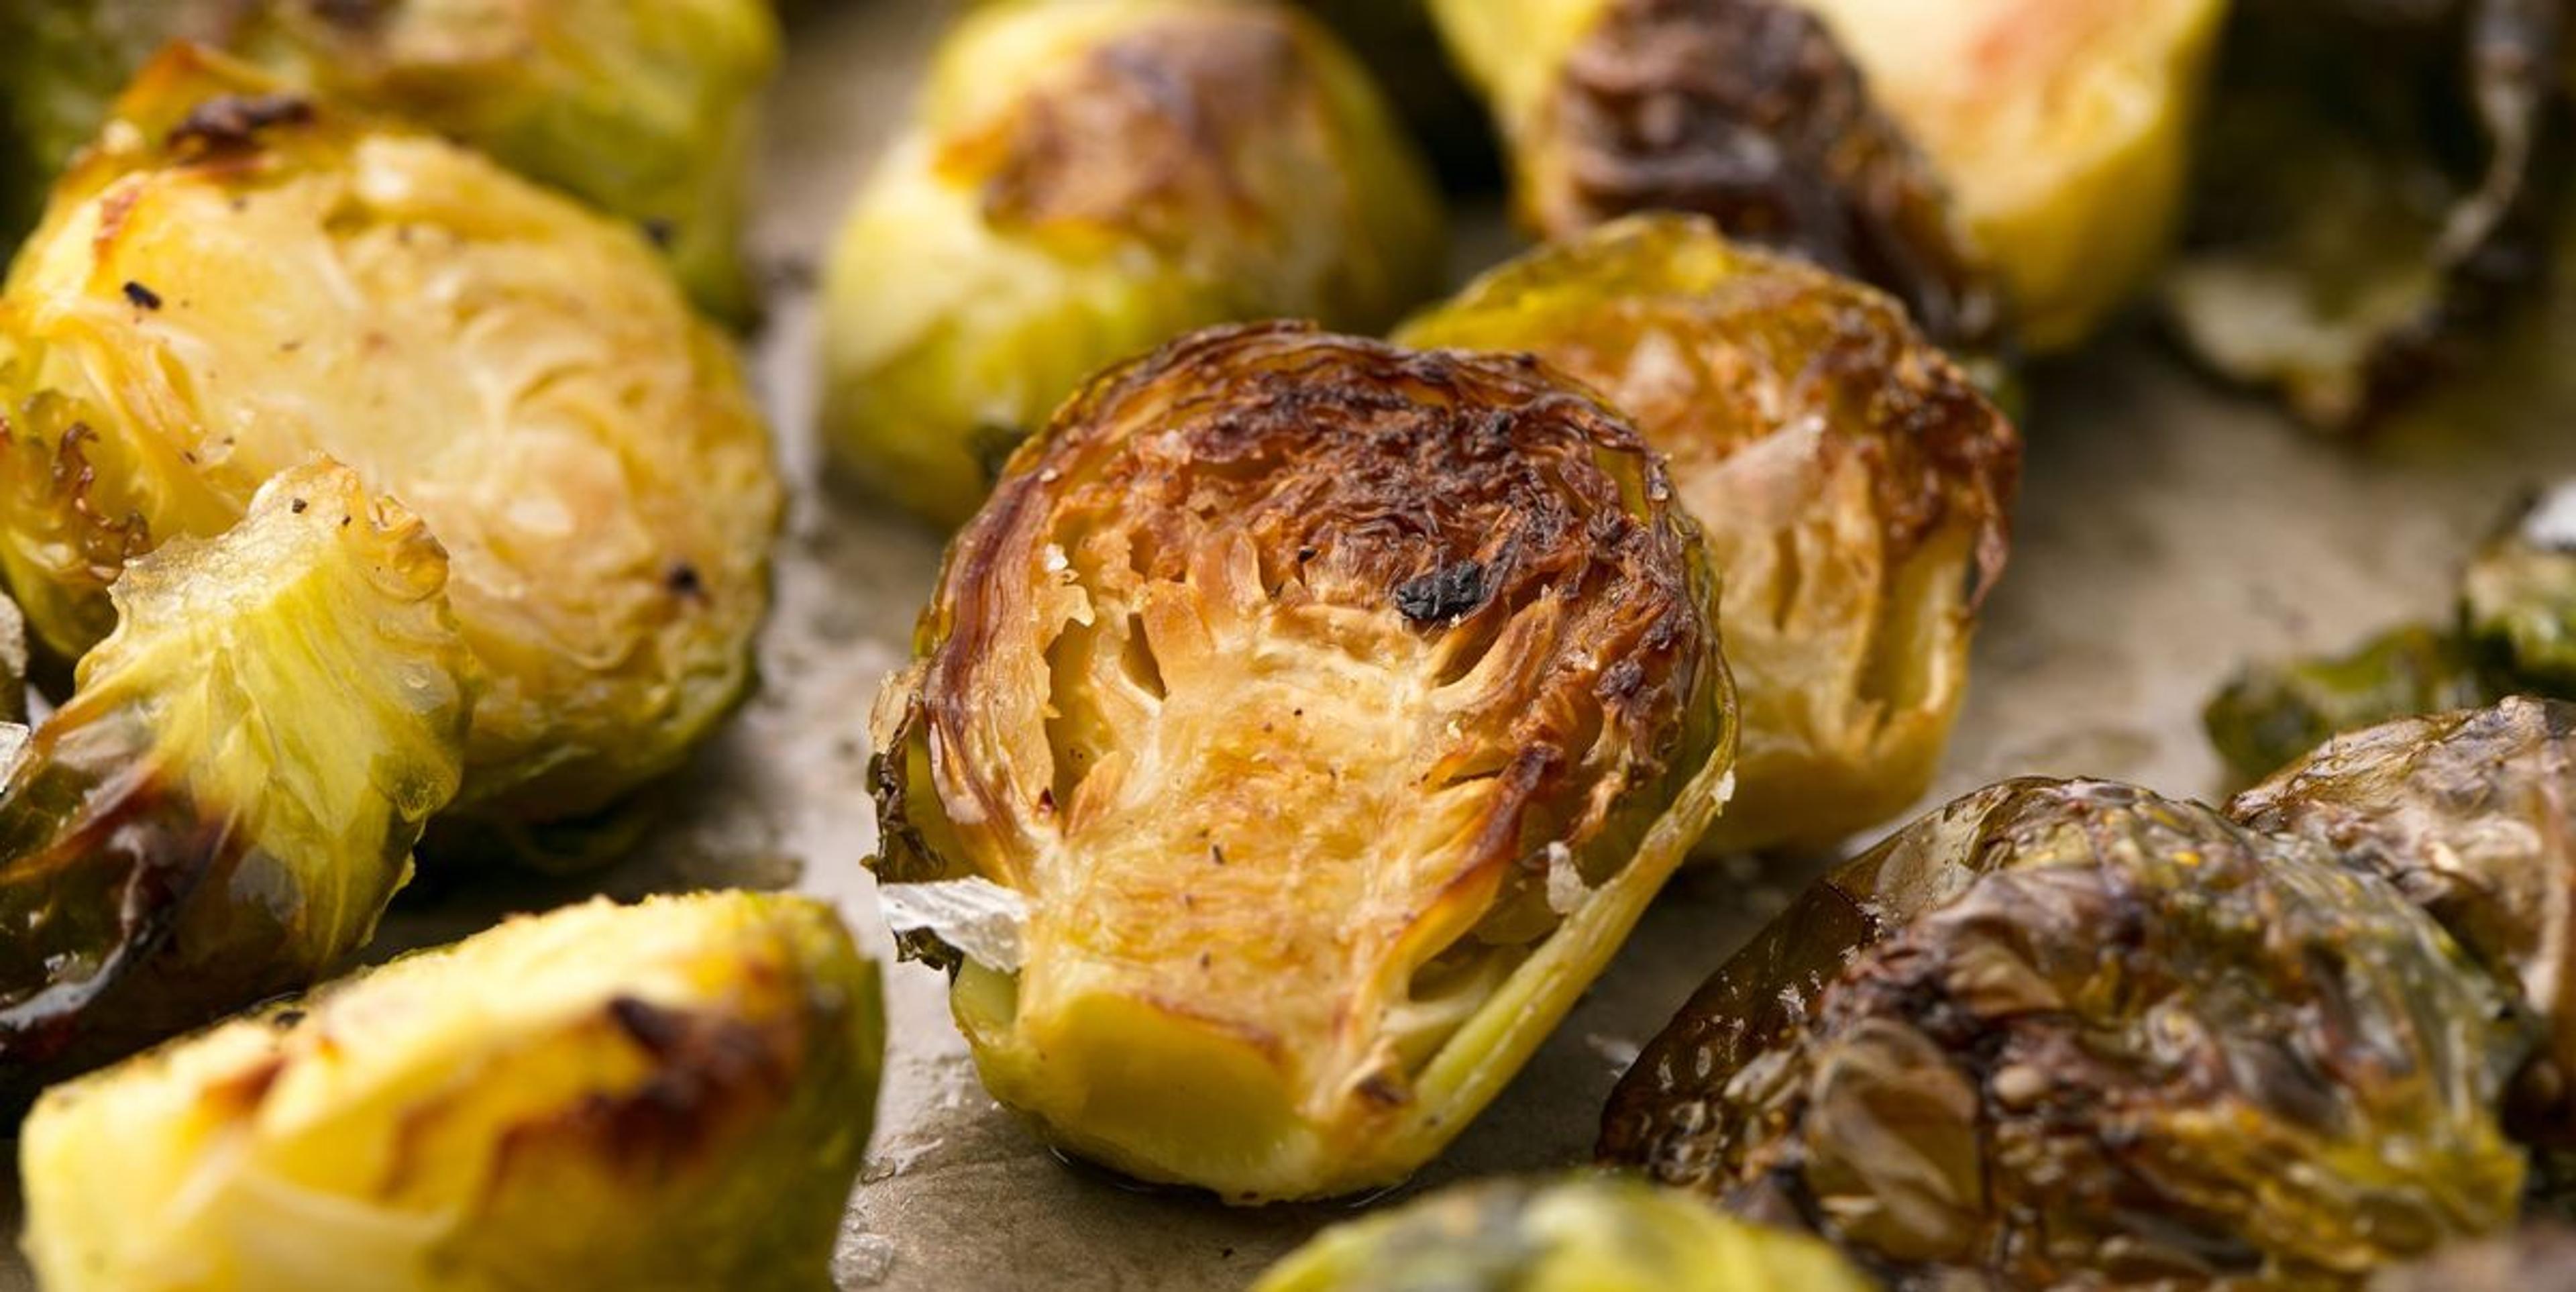 Best Roasted Brussel Sprouts Recipe - How to Cook Brussels Sprouts